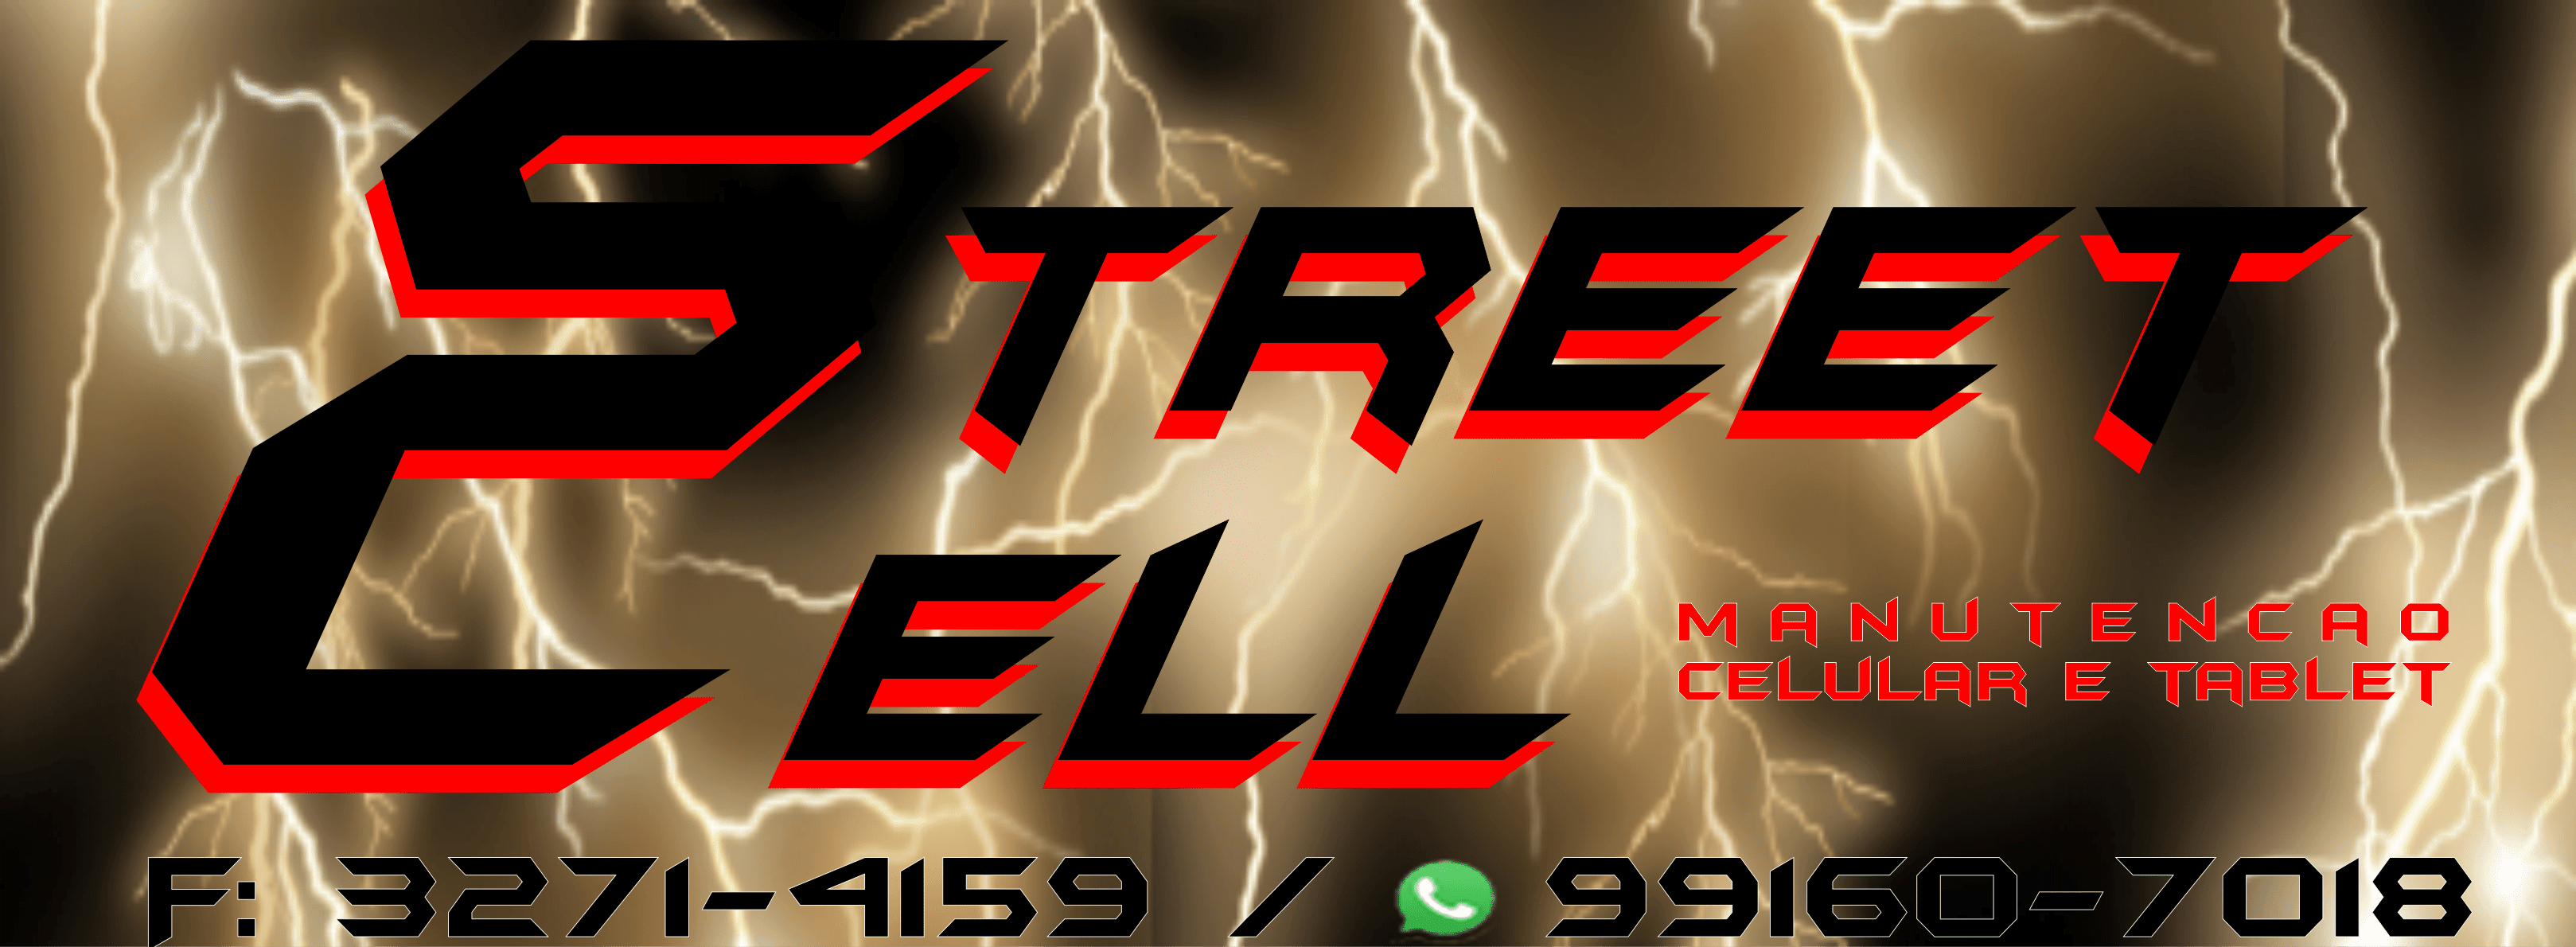 Streetcell